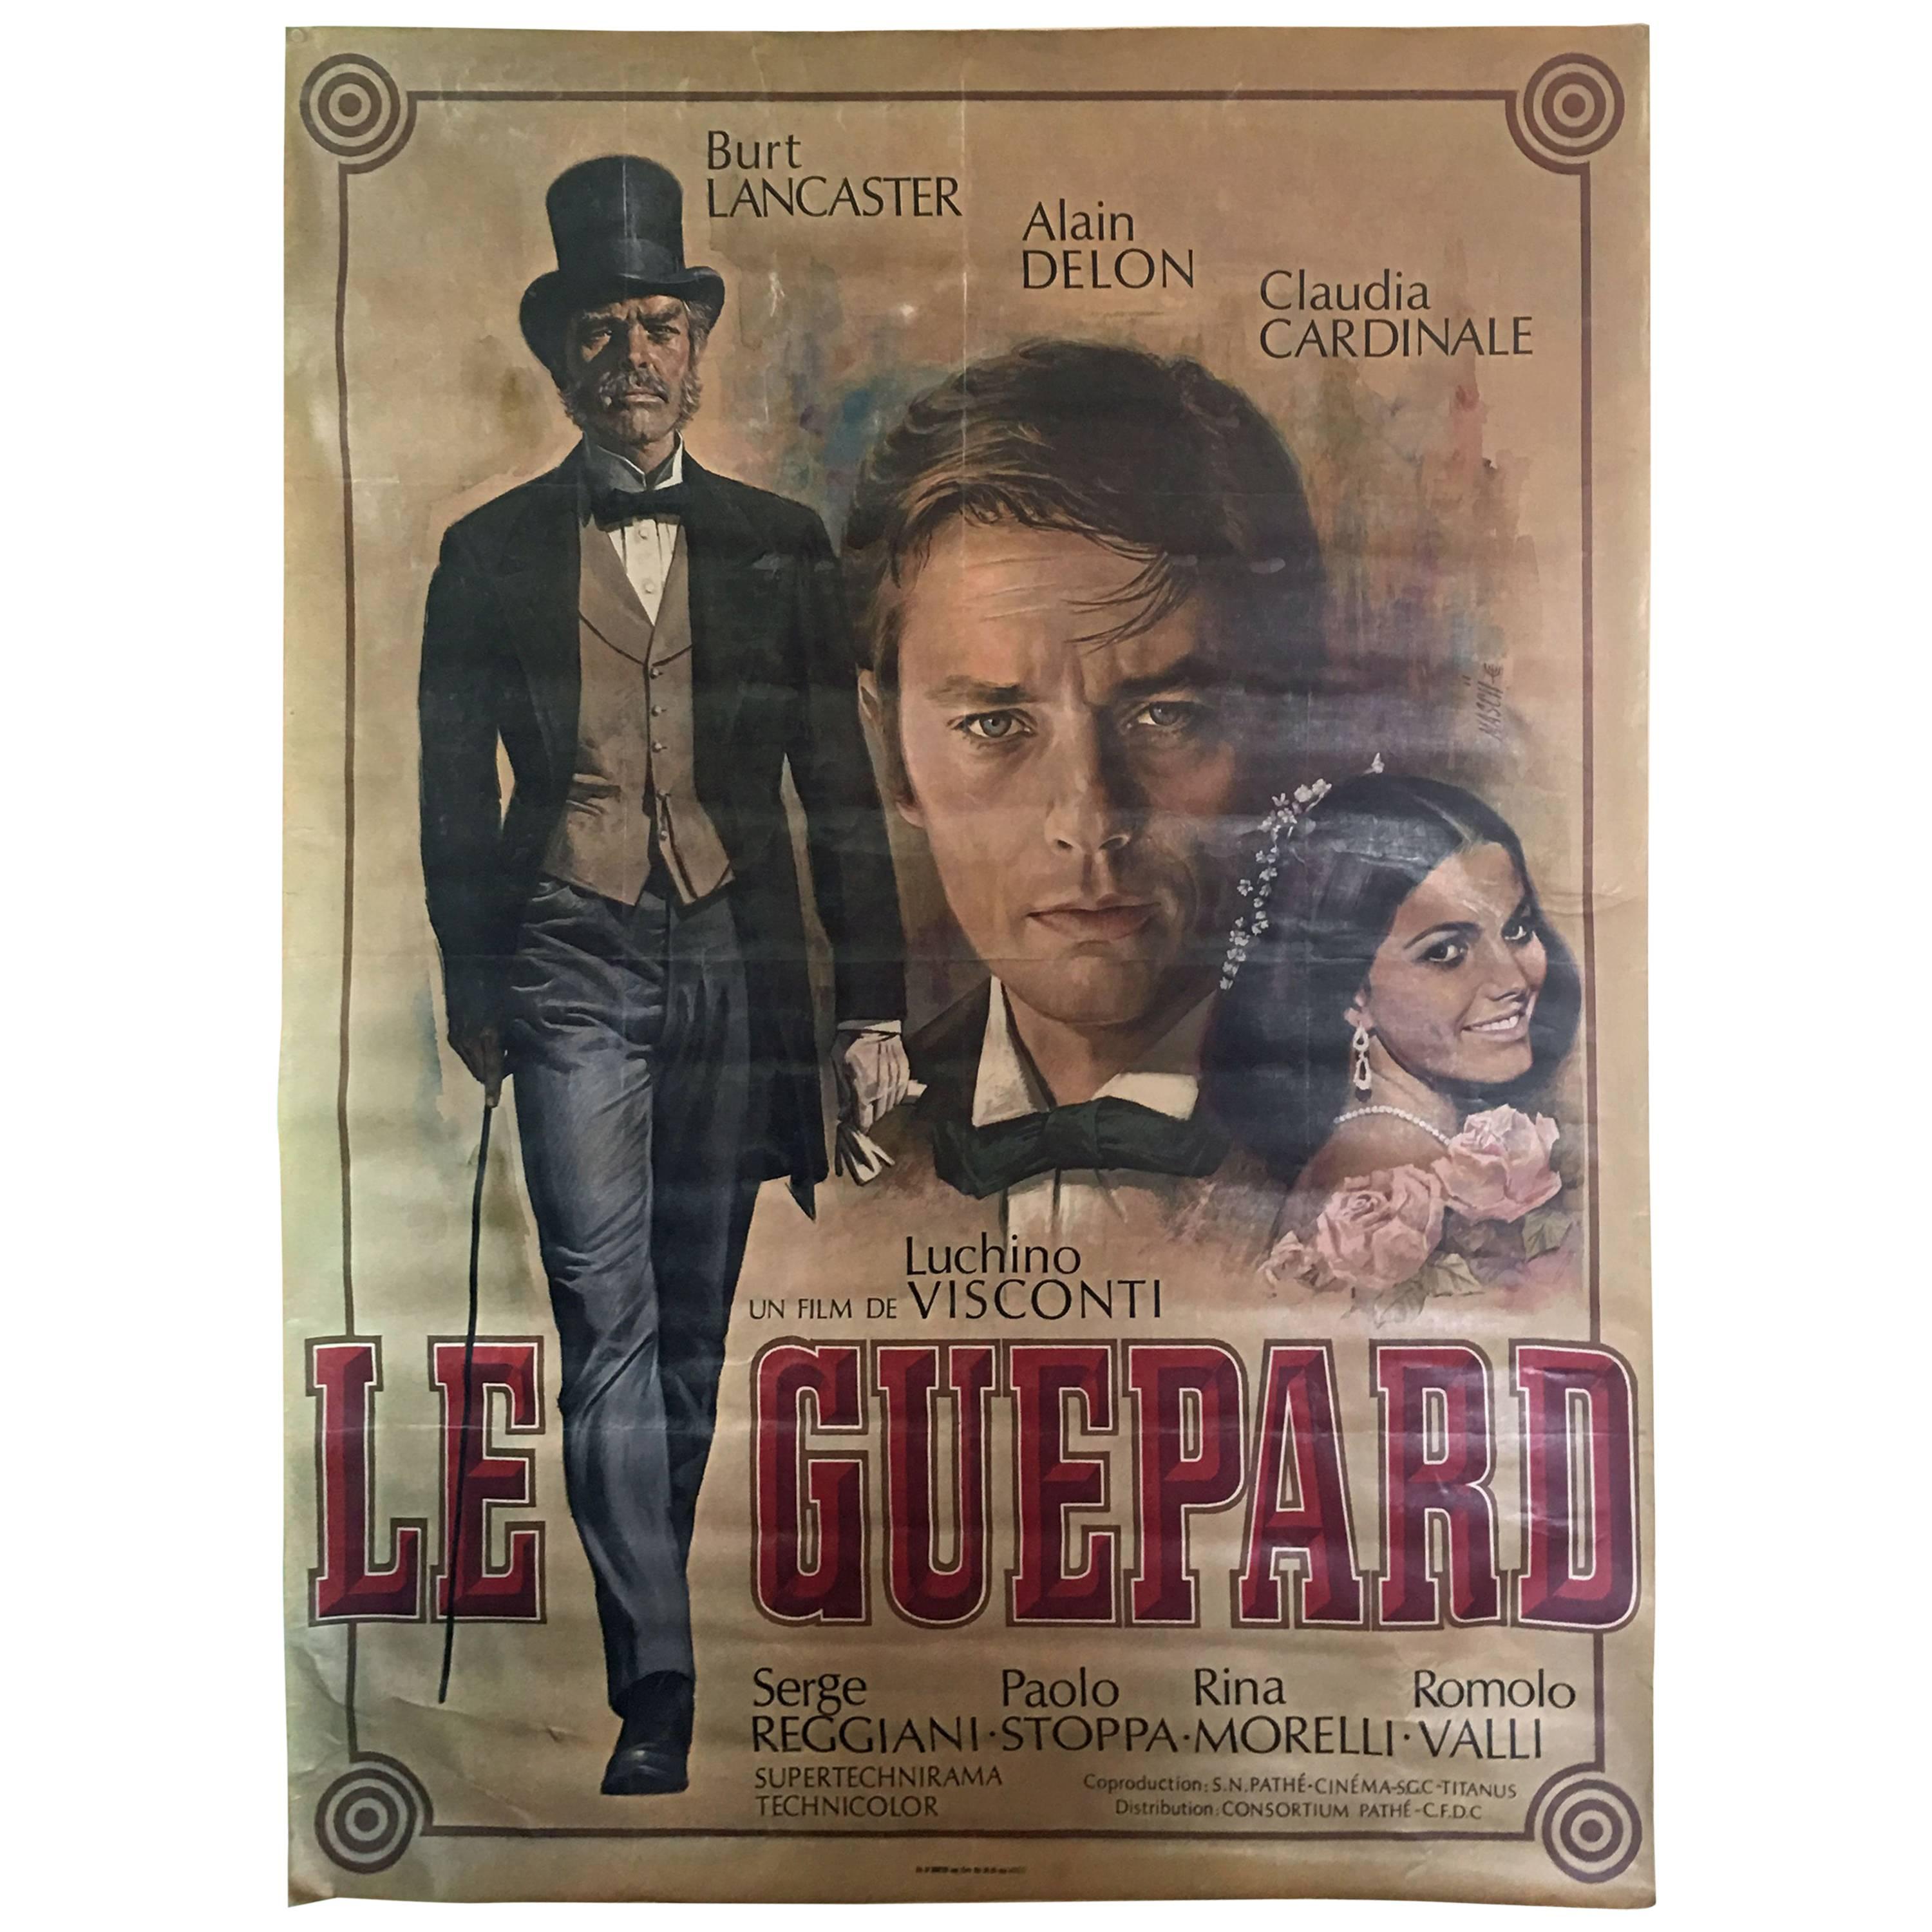 Jean Mascii Original Poster of "Le Guépard", Movie from Luchino Visconti For Sale